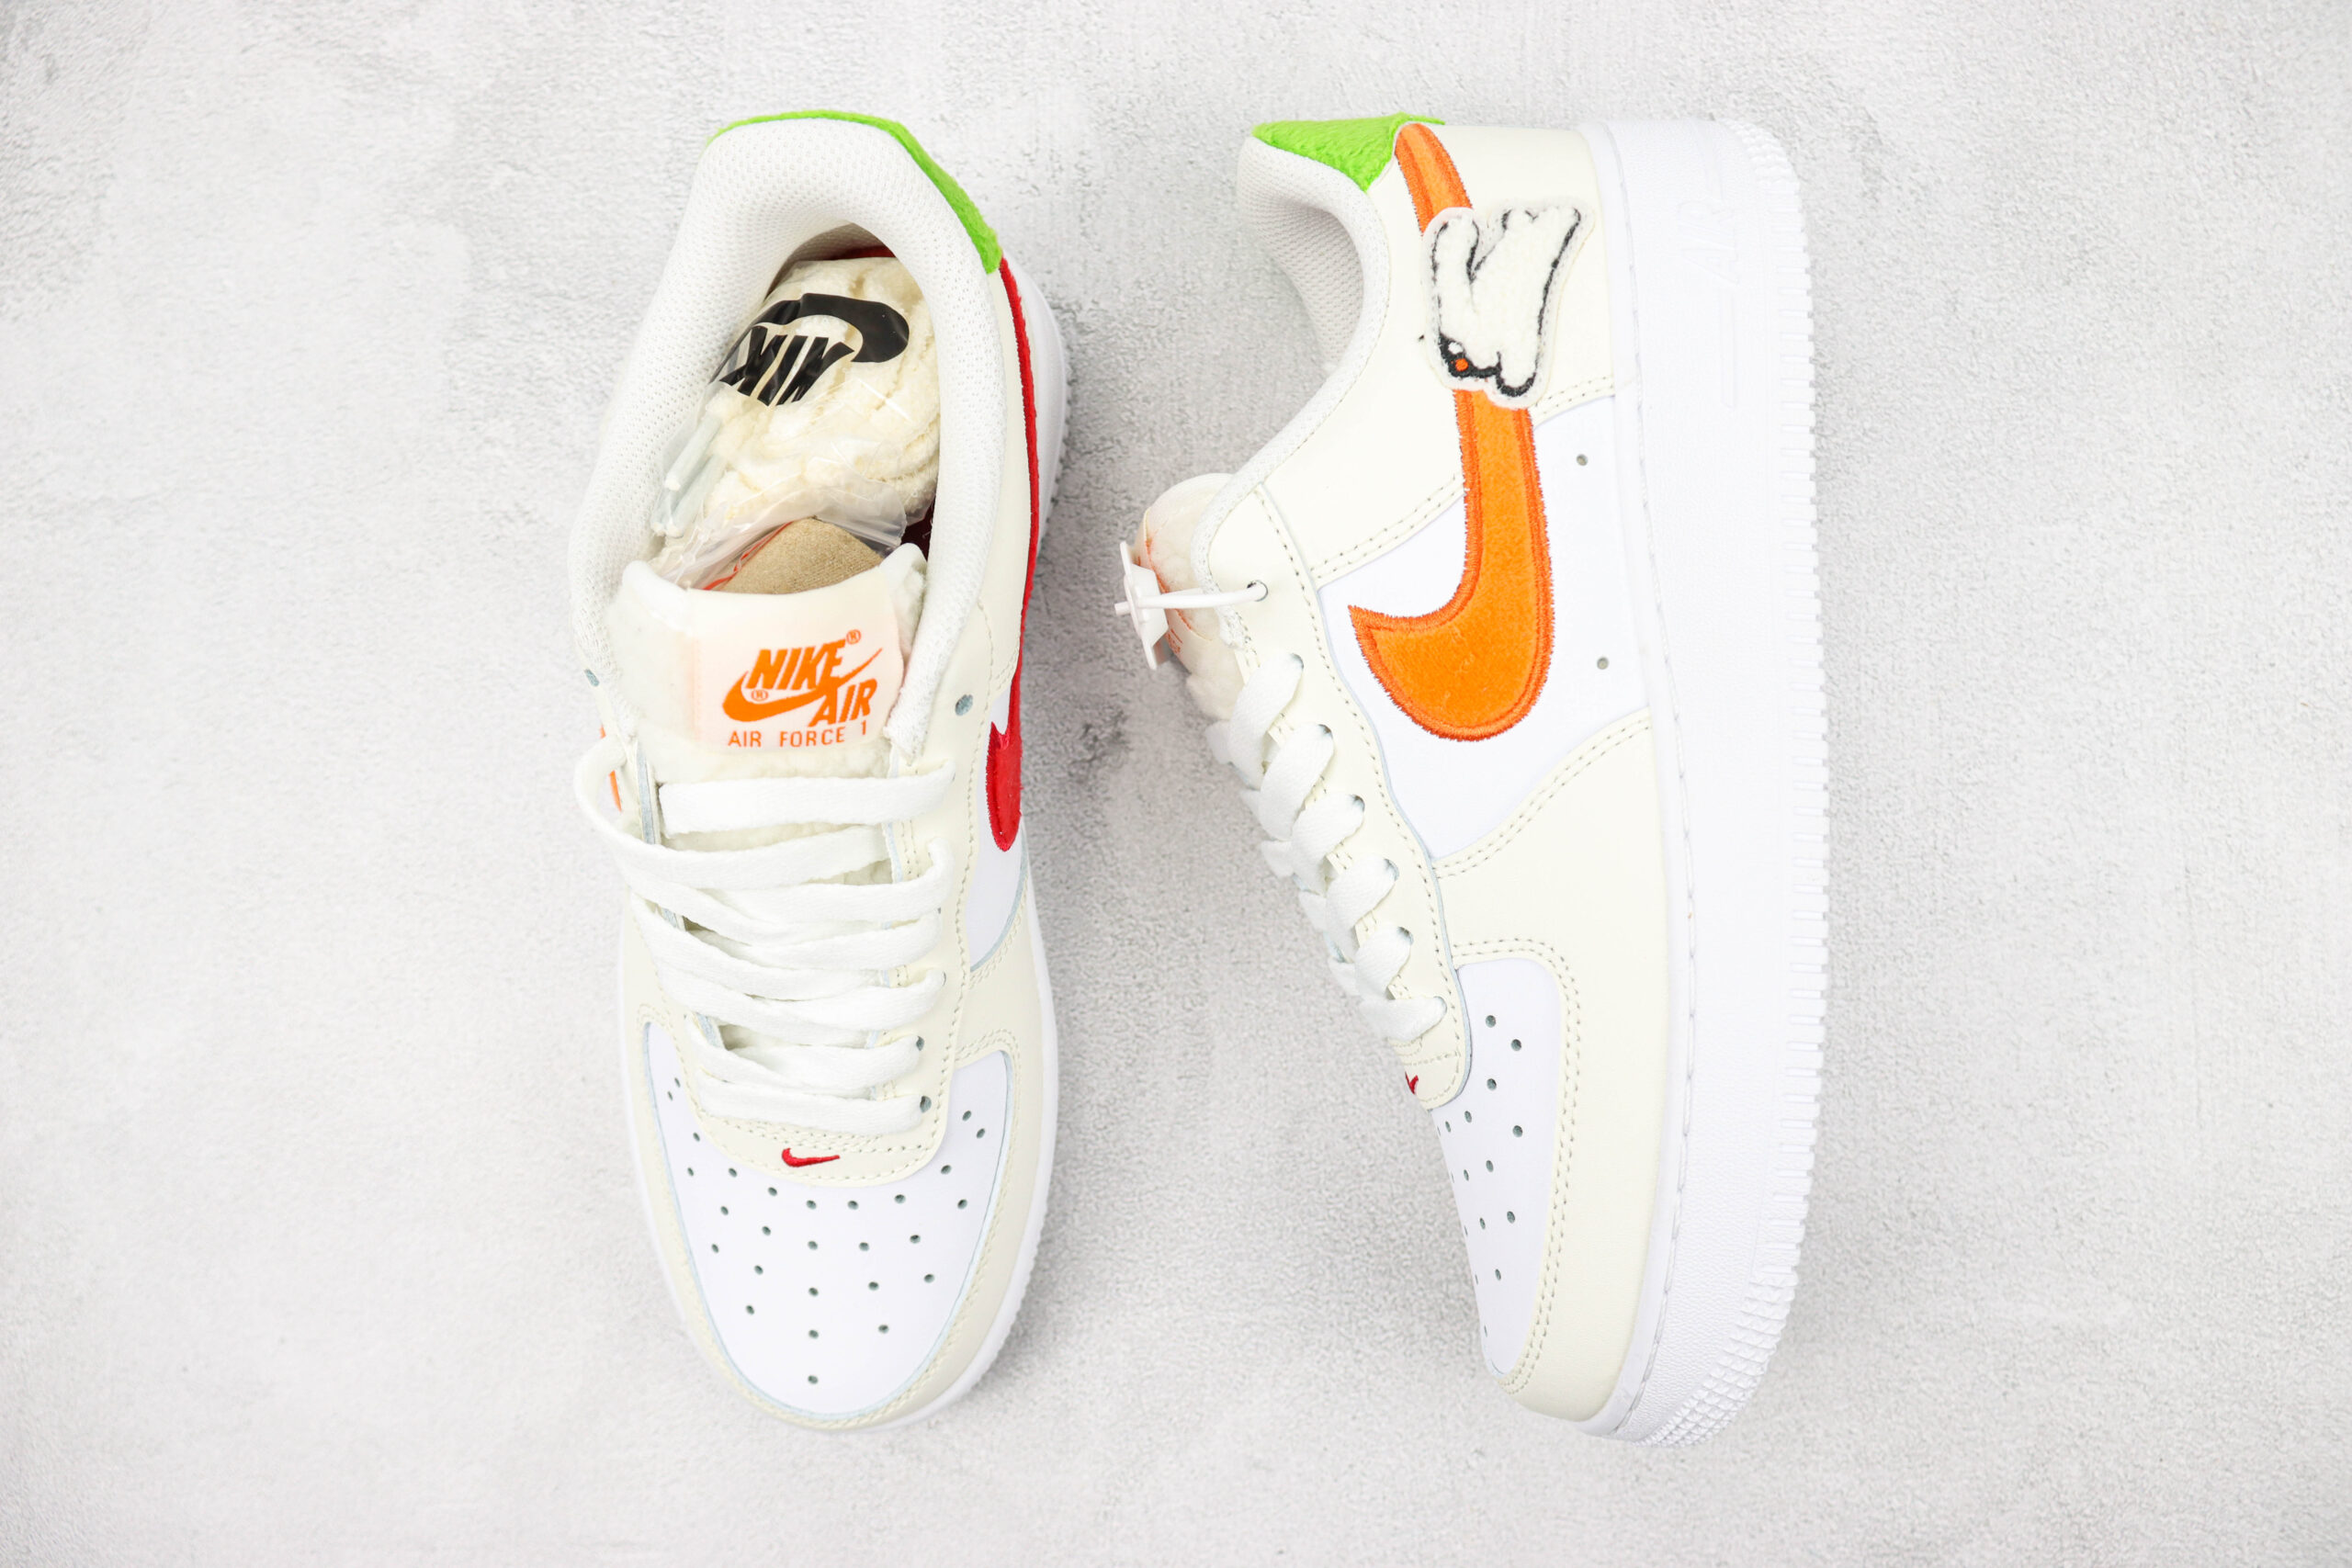 NIKE AIR FORCE 1 LV8 – “YEAR OF THE RABBIT”